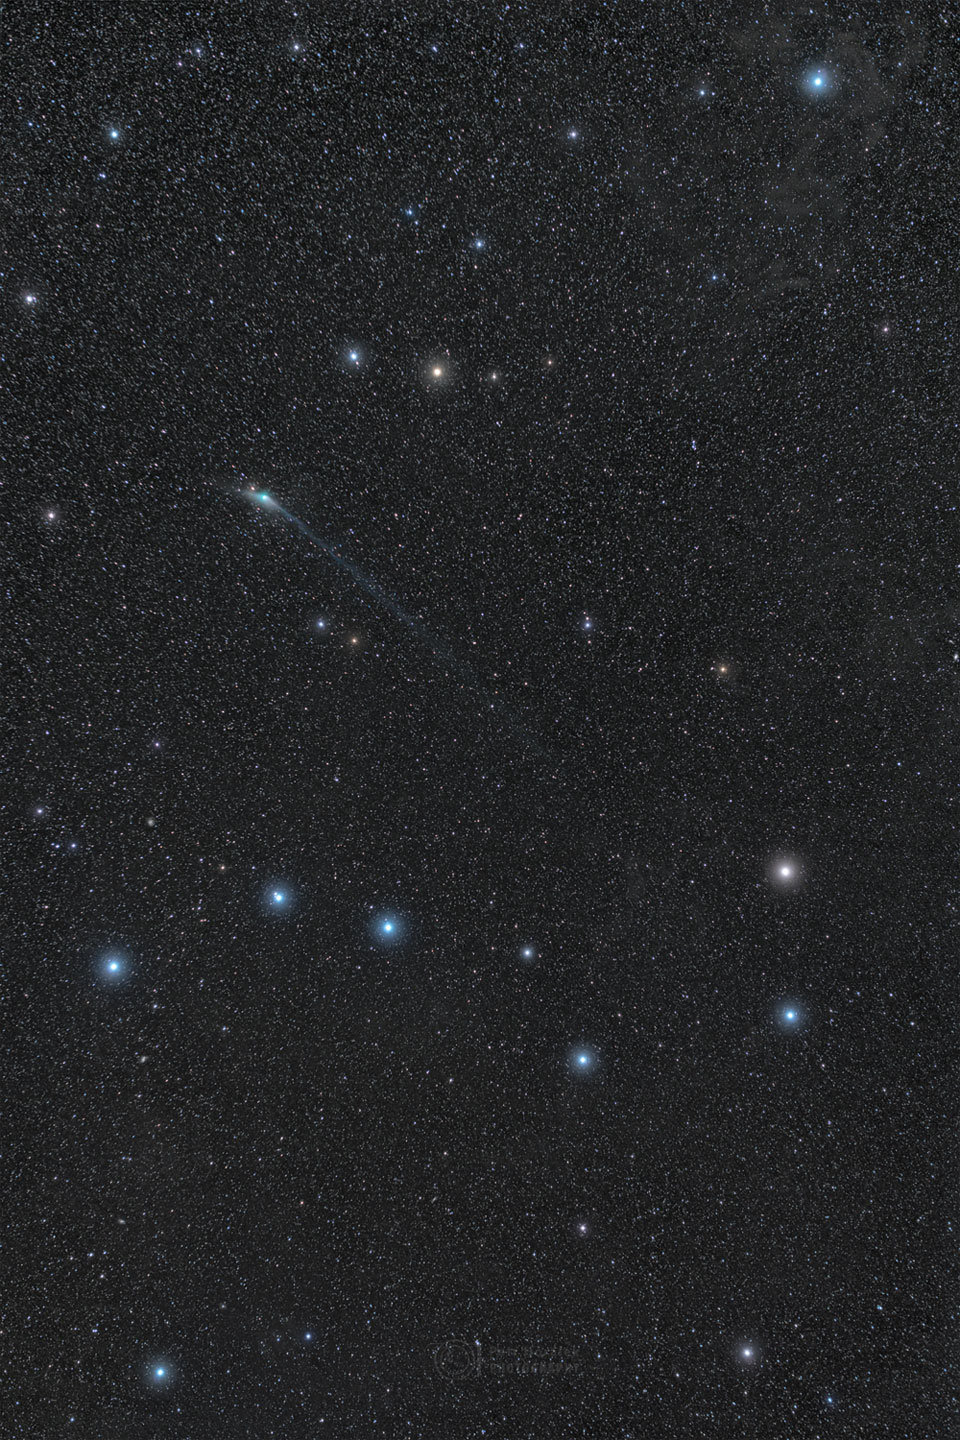 The featured image shows Comet ZTF with a long tail between two famous
star asterisms: the Big Dipper and the Little Dipper. The image depicts
the Little Dipper near the top of the image, and the Big Dipper near
the bottom.
Please see the explanation for more detailed information.